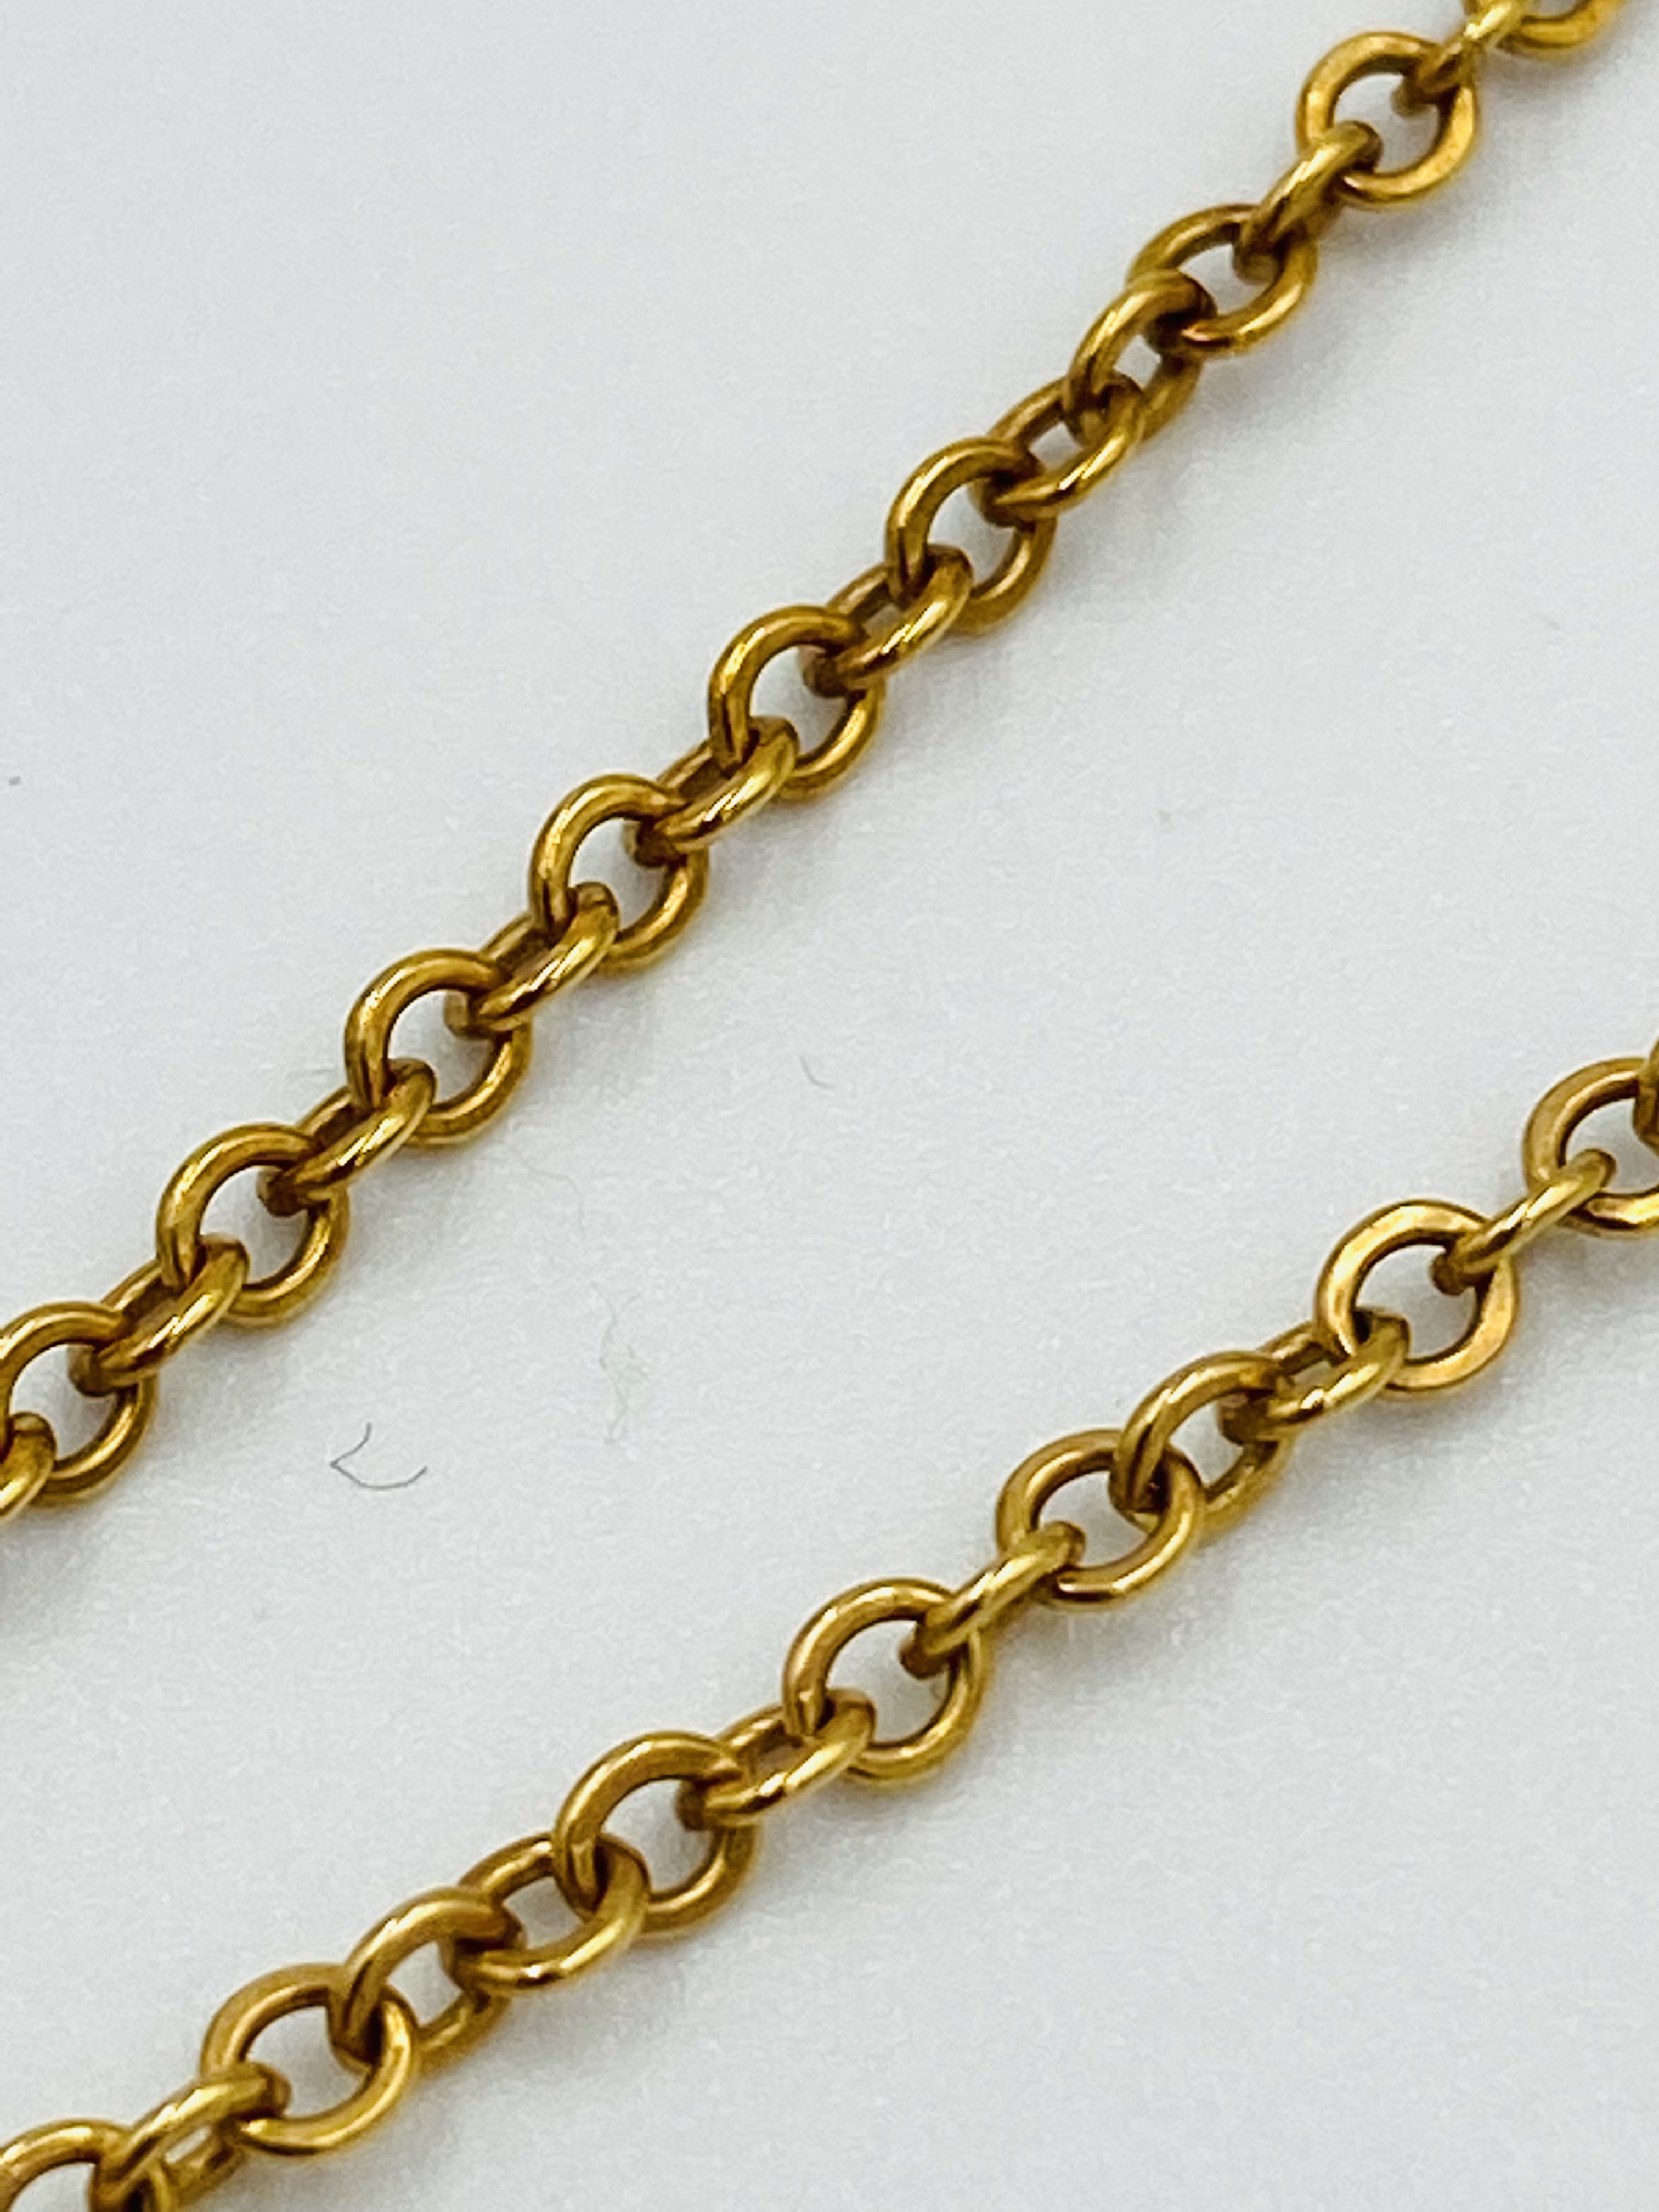 9ct gold pendant and chain - Image 3 of 4